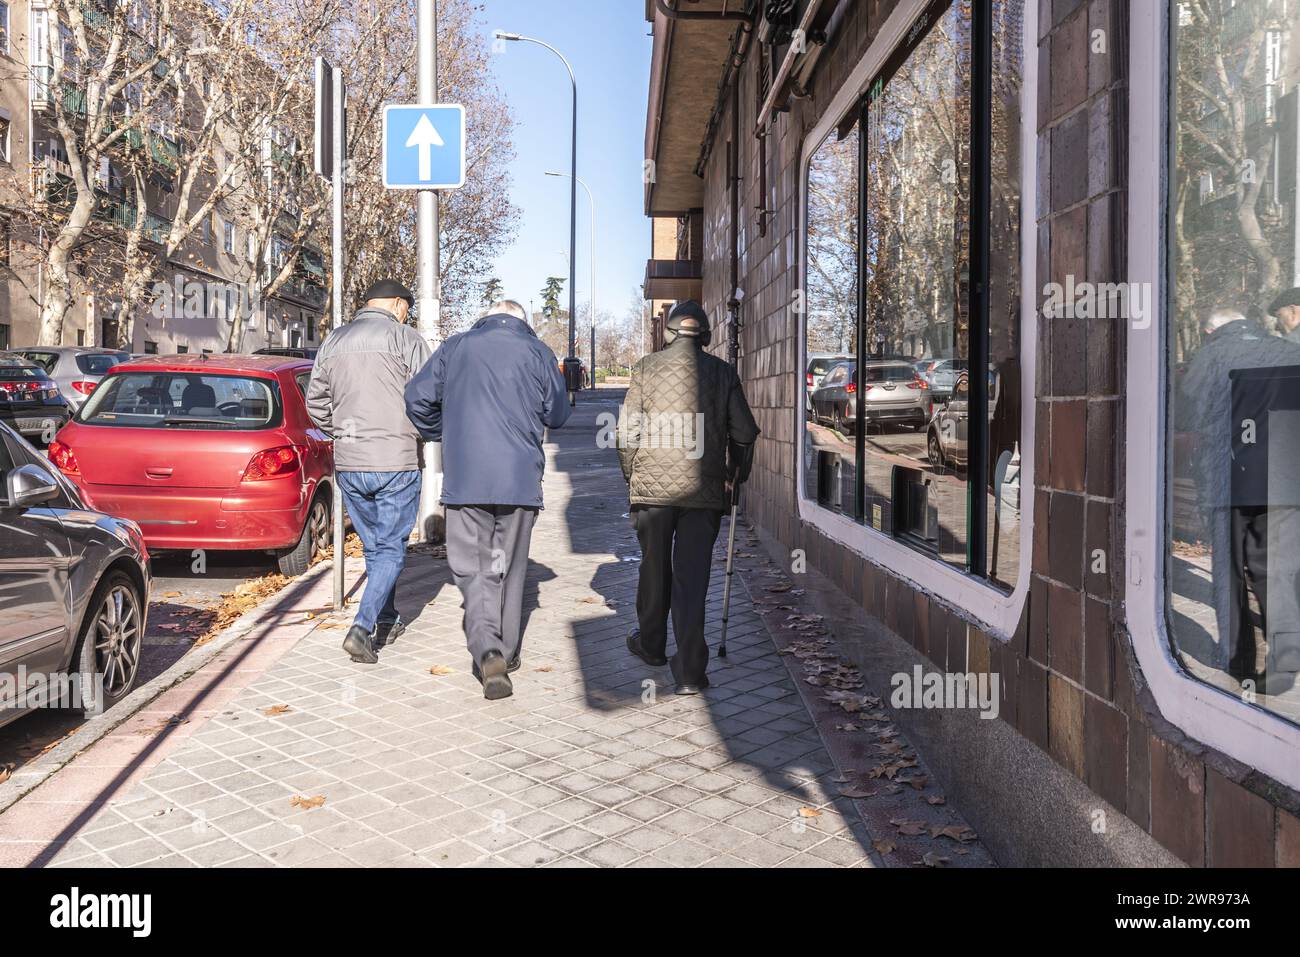 A group of older people walking on a sidewalk in the city Stock Photo